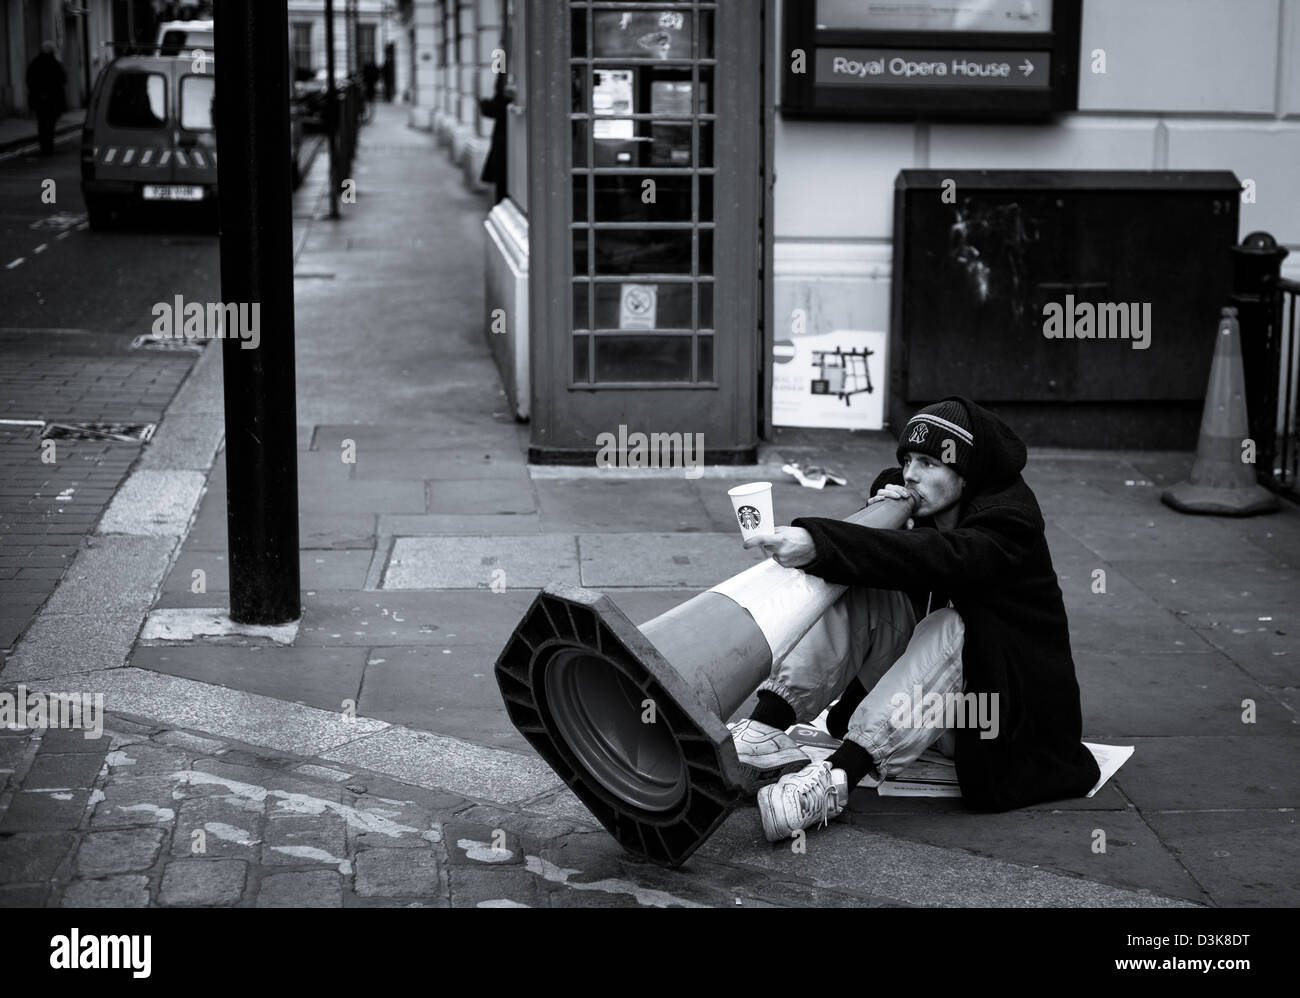 Man sat on ground playing a road cone like a musical horn for money next to the Royal Opera House, London Stock Photo